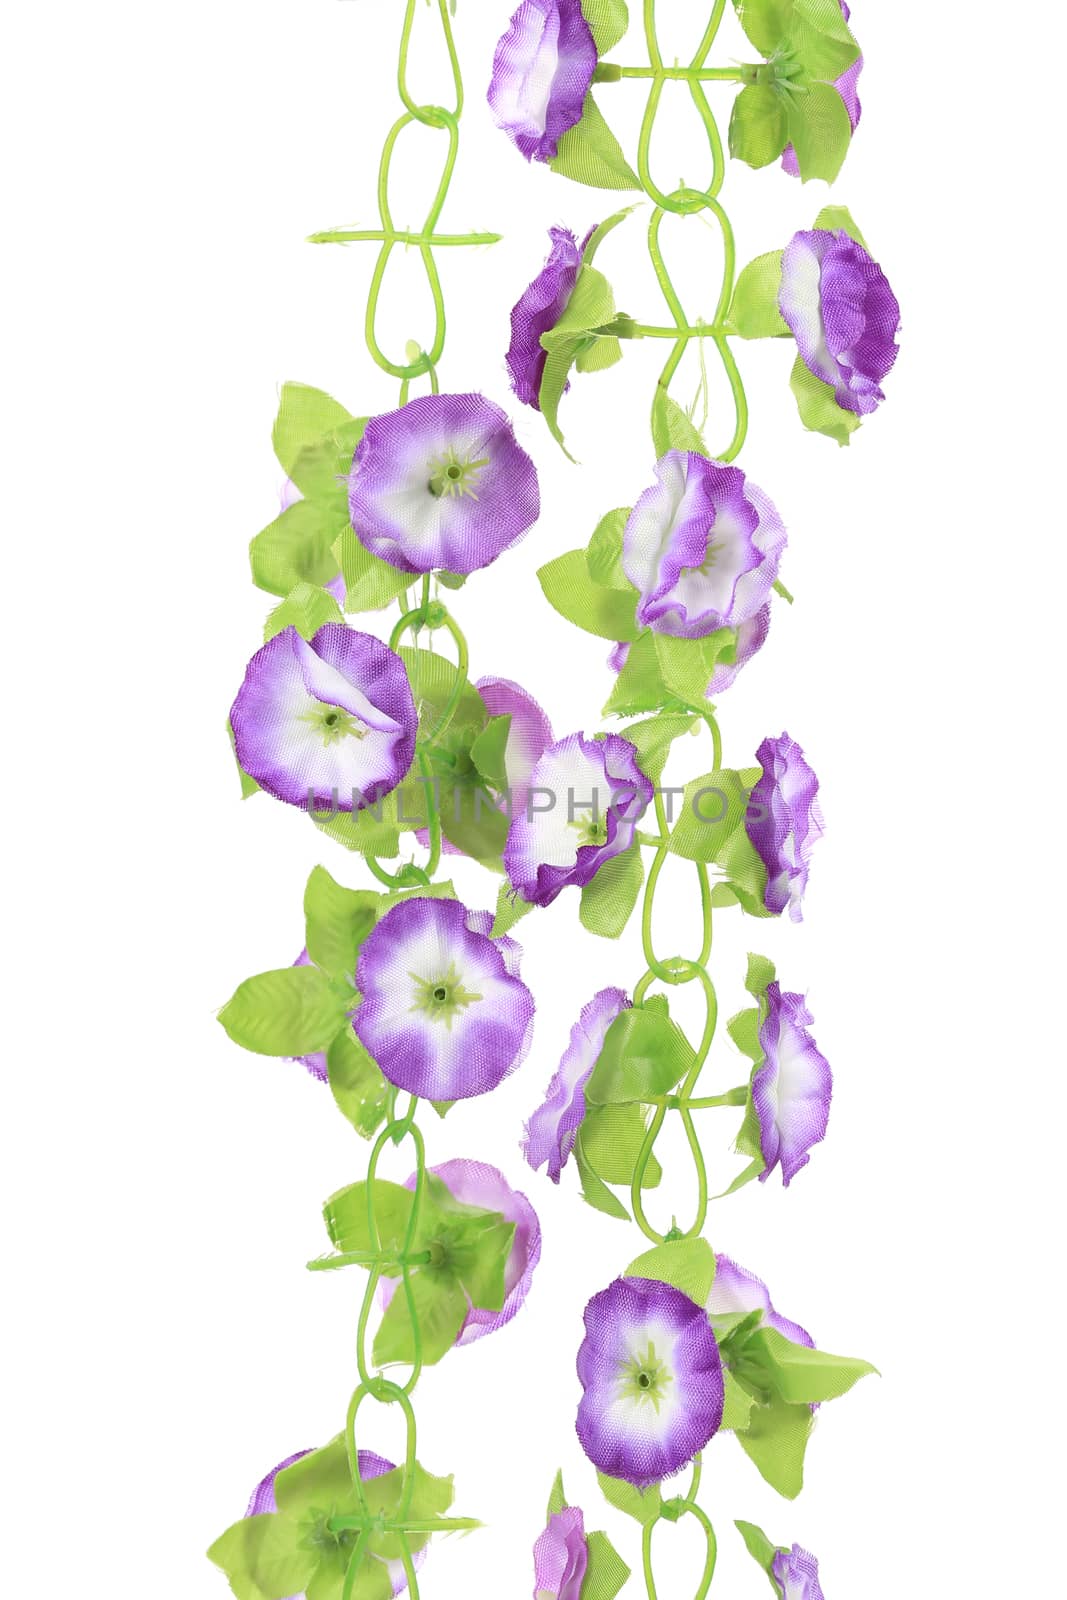 Hanging artificial flowers. On a white background.